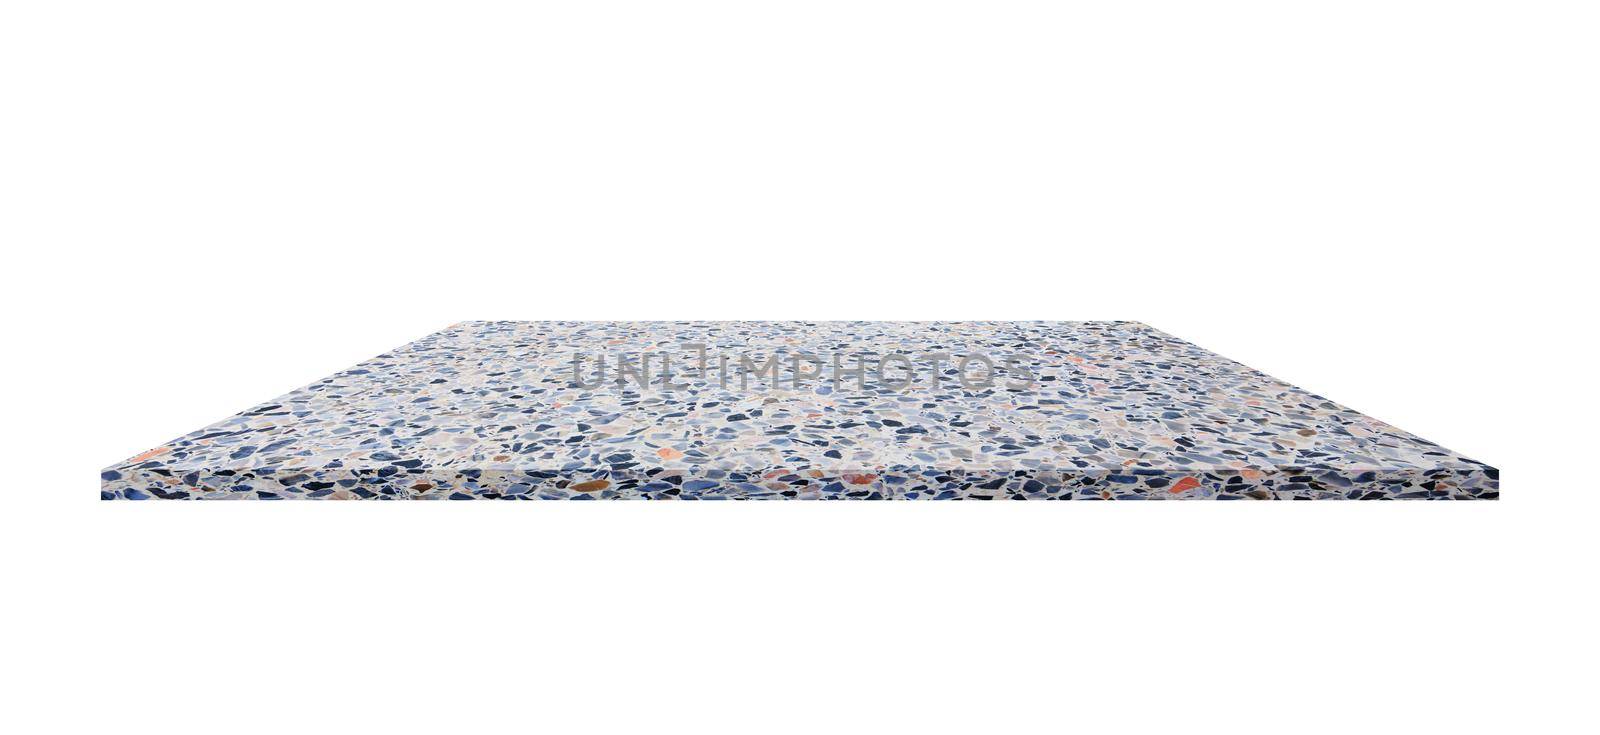 shelves marble design. terrazzo flooring beautiful stone on background for your product